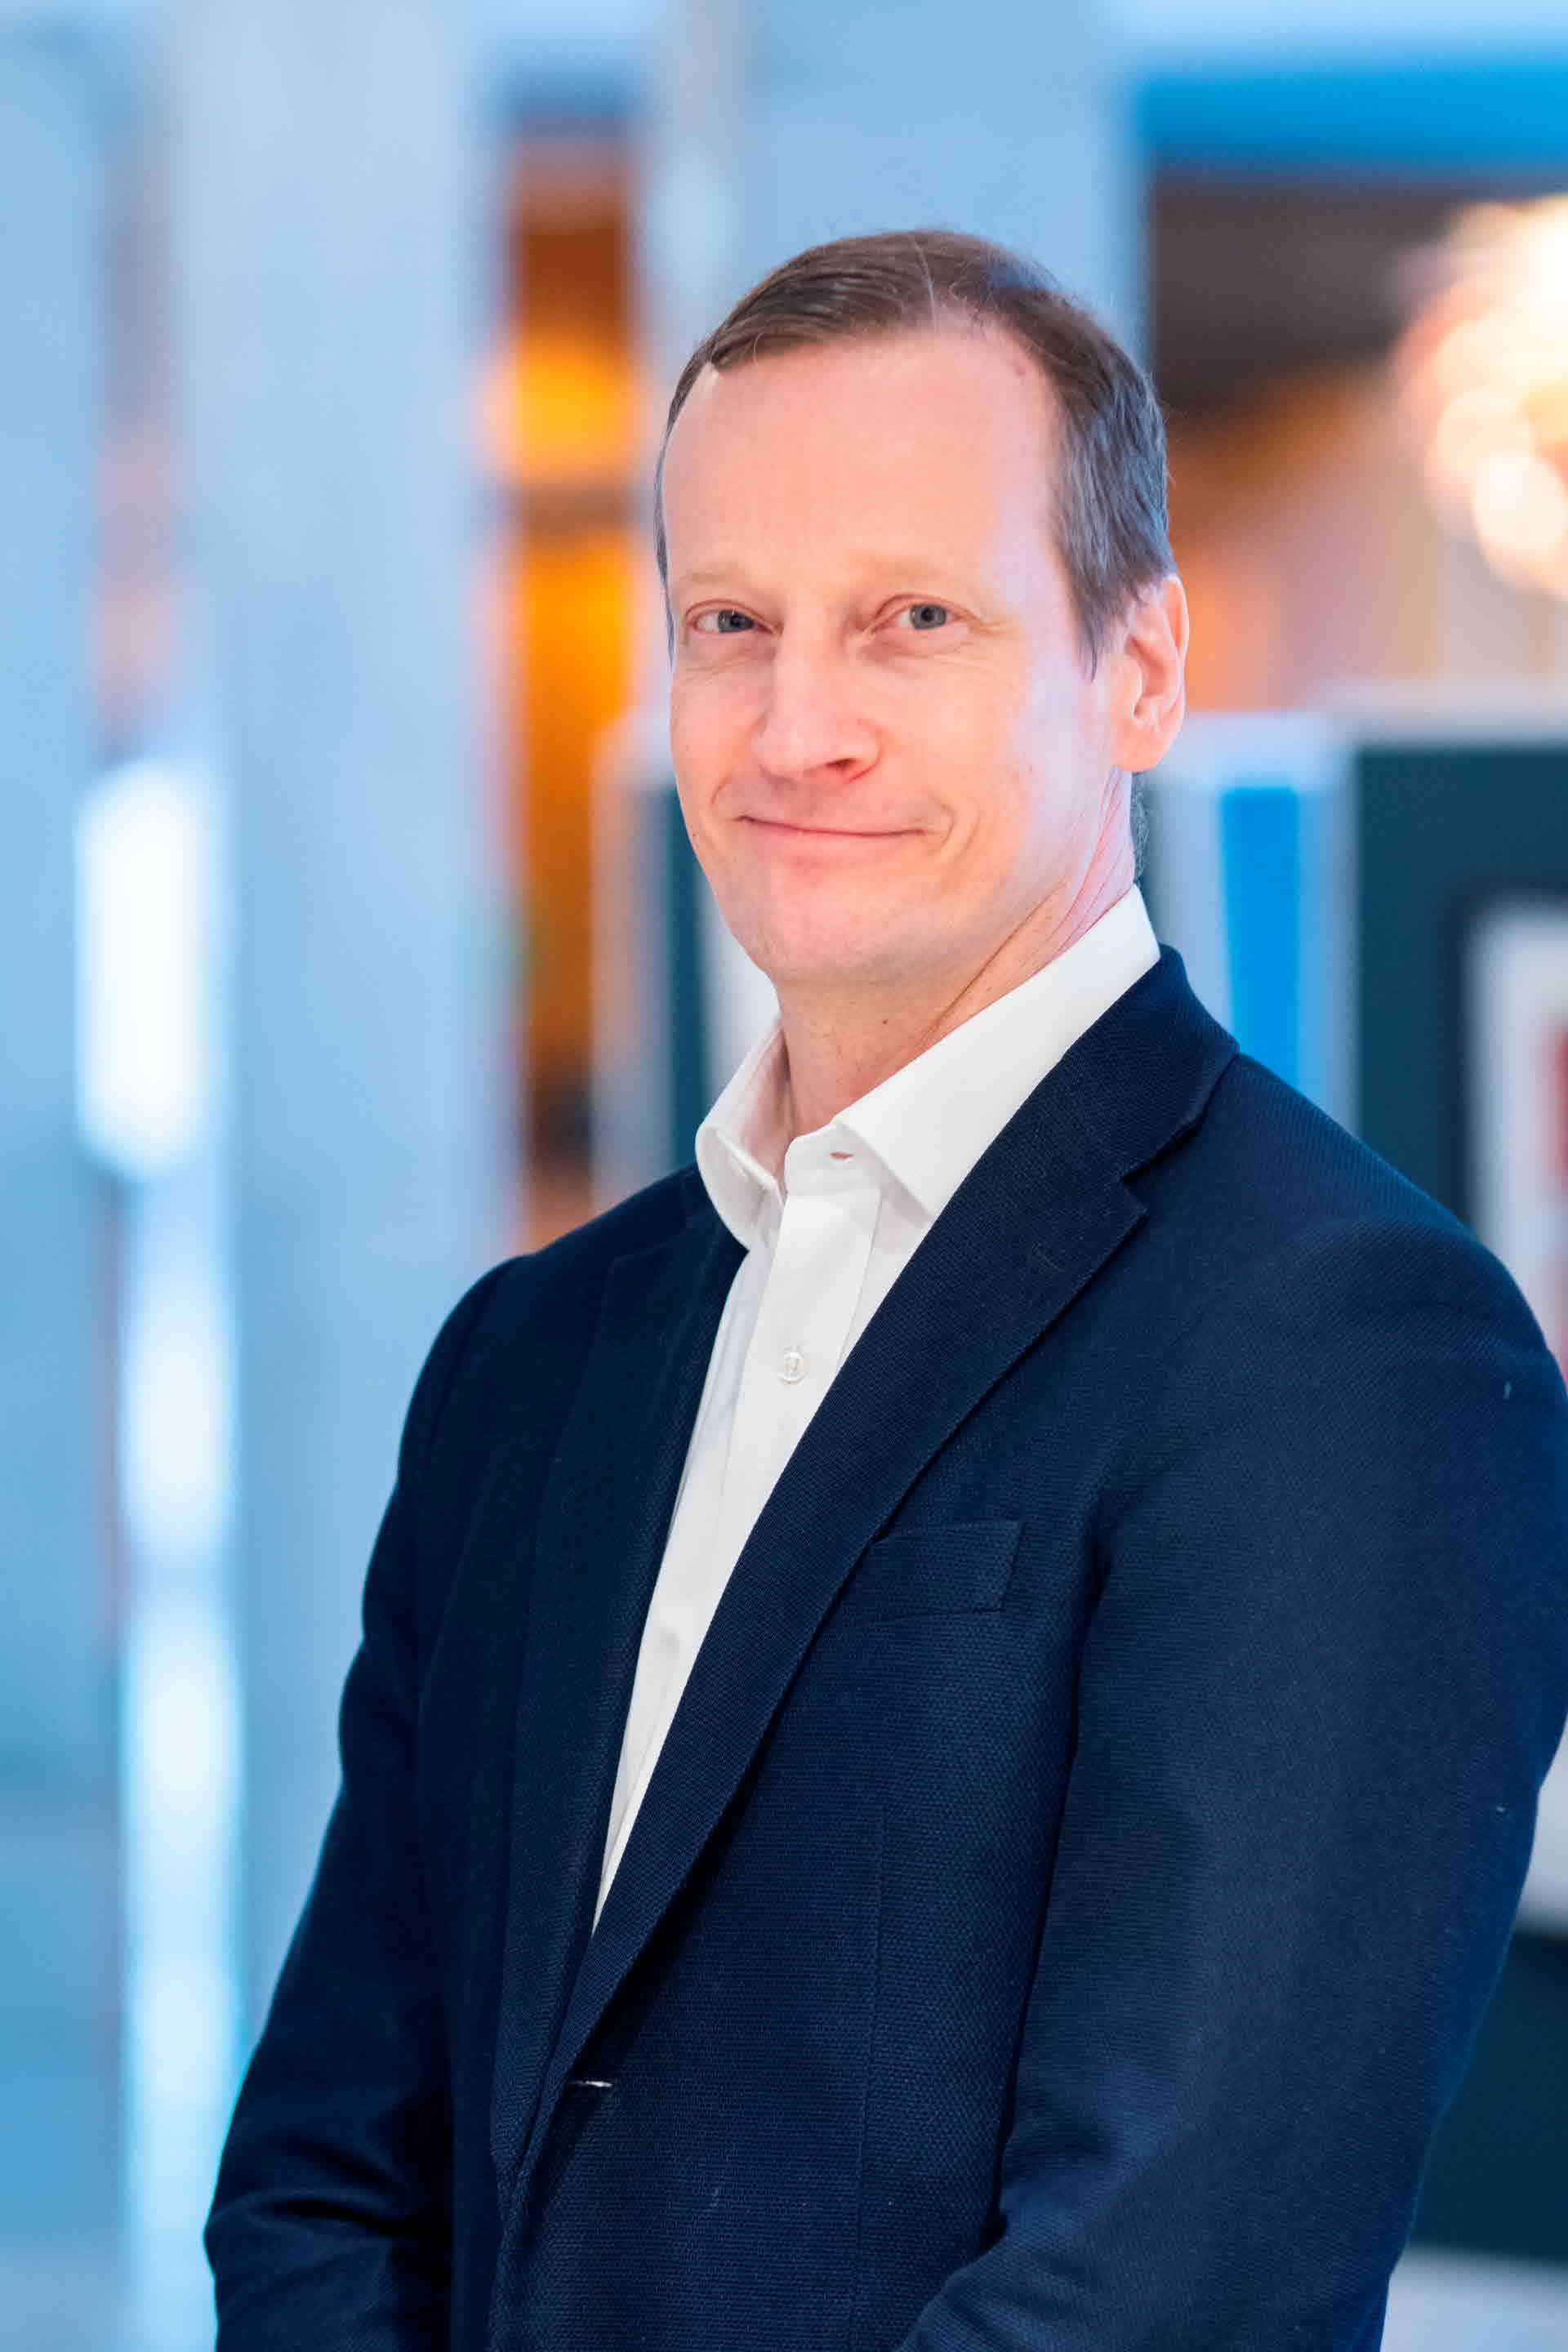 Anders Edholm, Senior Vice President Sustainability and Communications